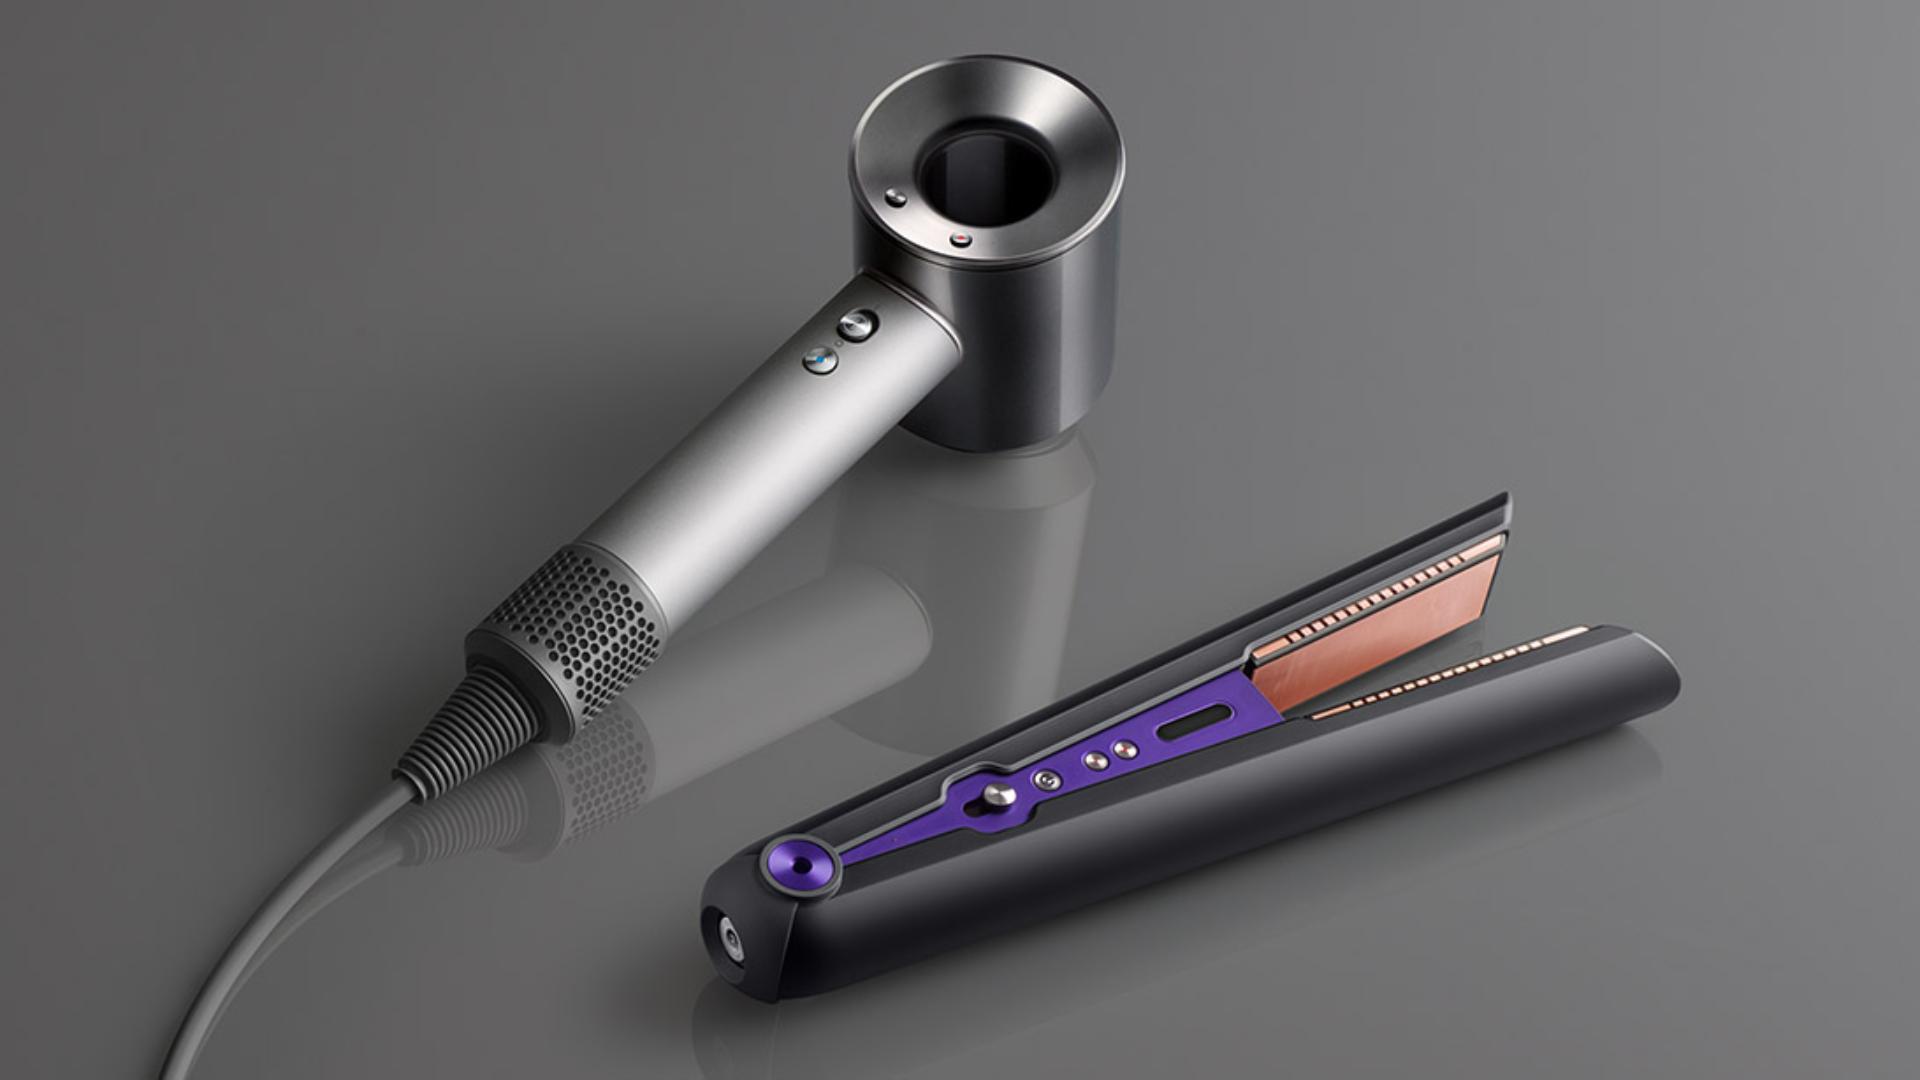 Full selection of Dyson hair care technology